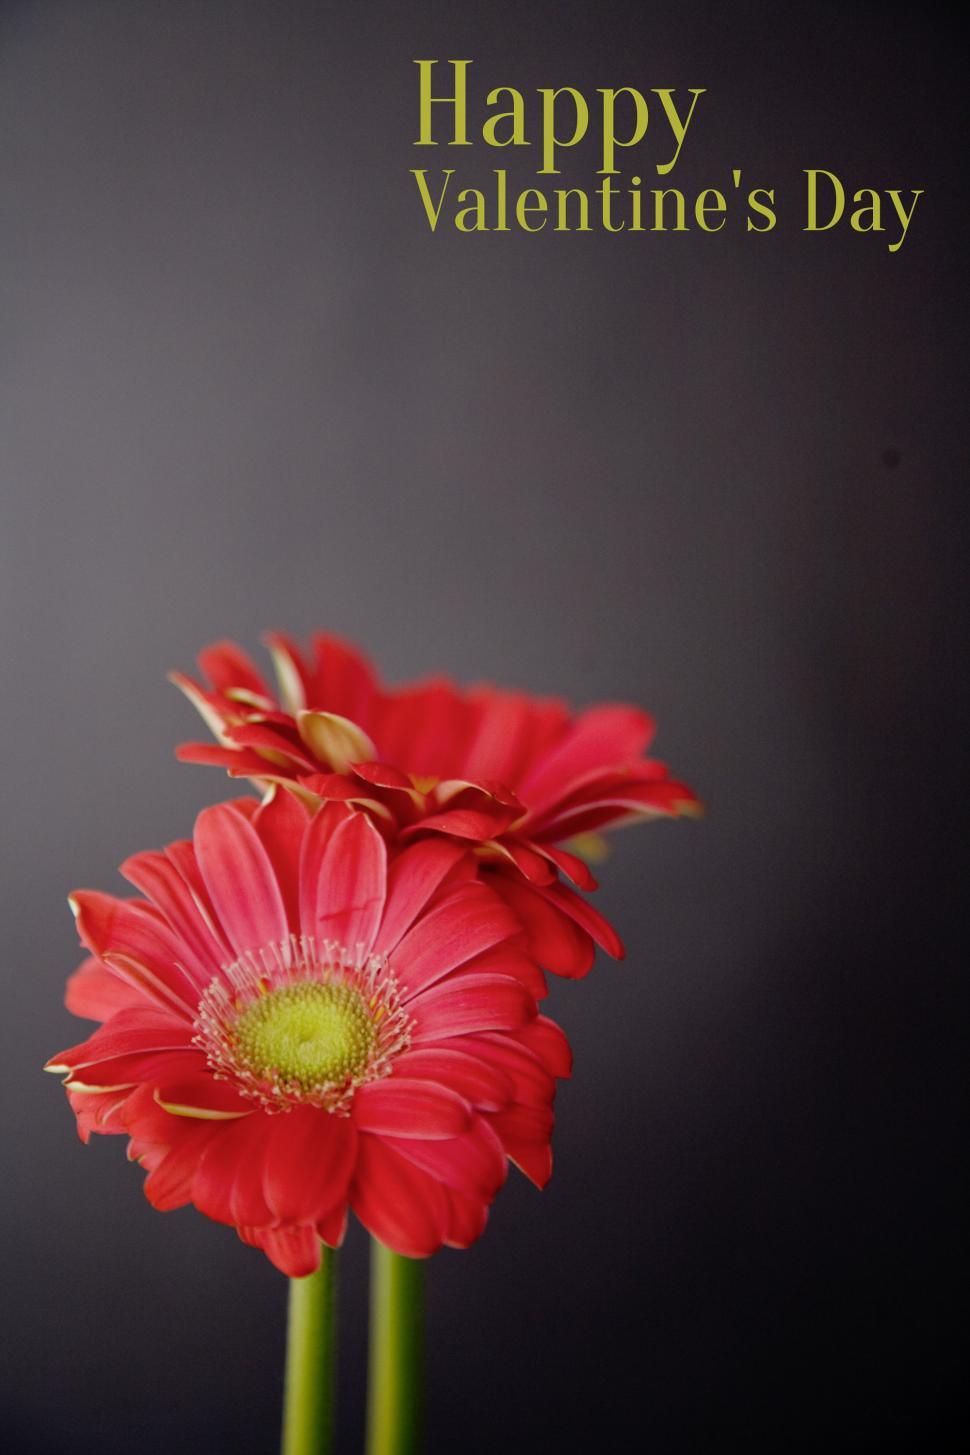 Free Image of Two Red Flowers on Table 